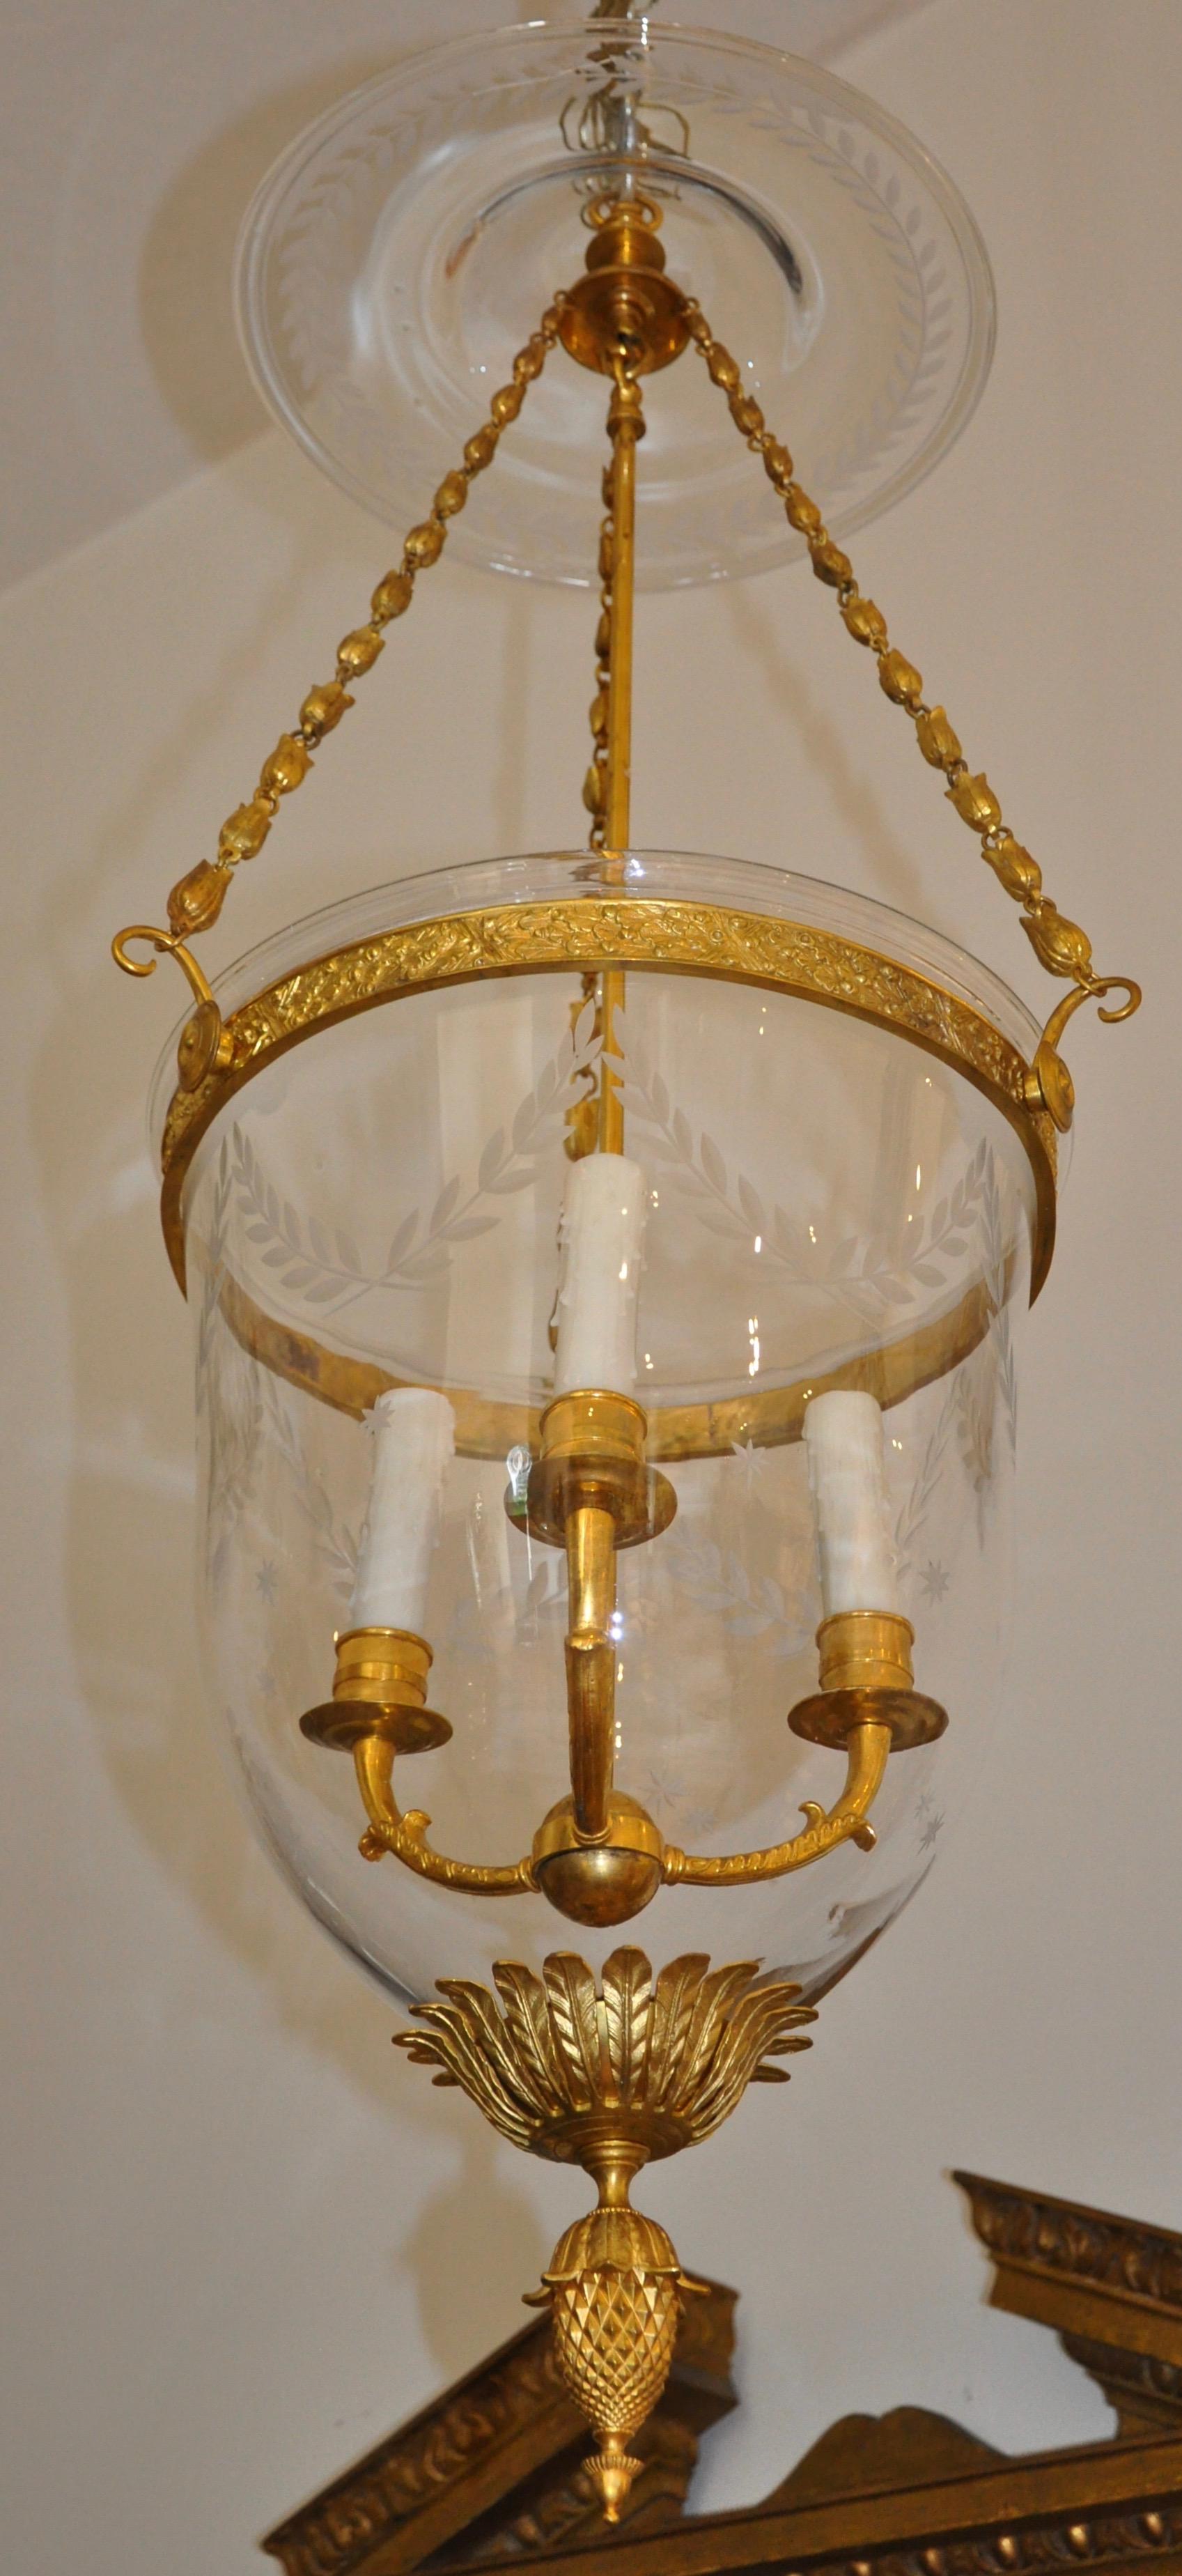 Impressive scale early 20th century Russian neoclassical gilt bronze hall lantern chandelier

--hand blown bell jar and smoke shade, deeply etched with laurel swags and stars in neoclassical motif. Gilt bronze bell-flower chain. Bottom with